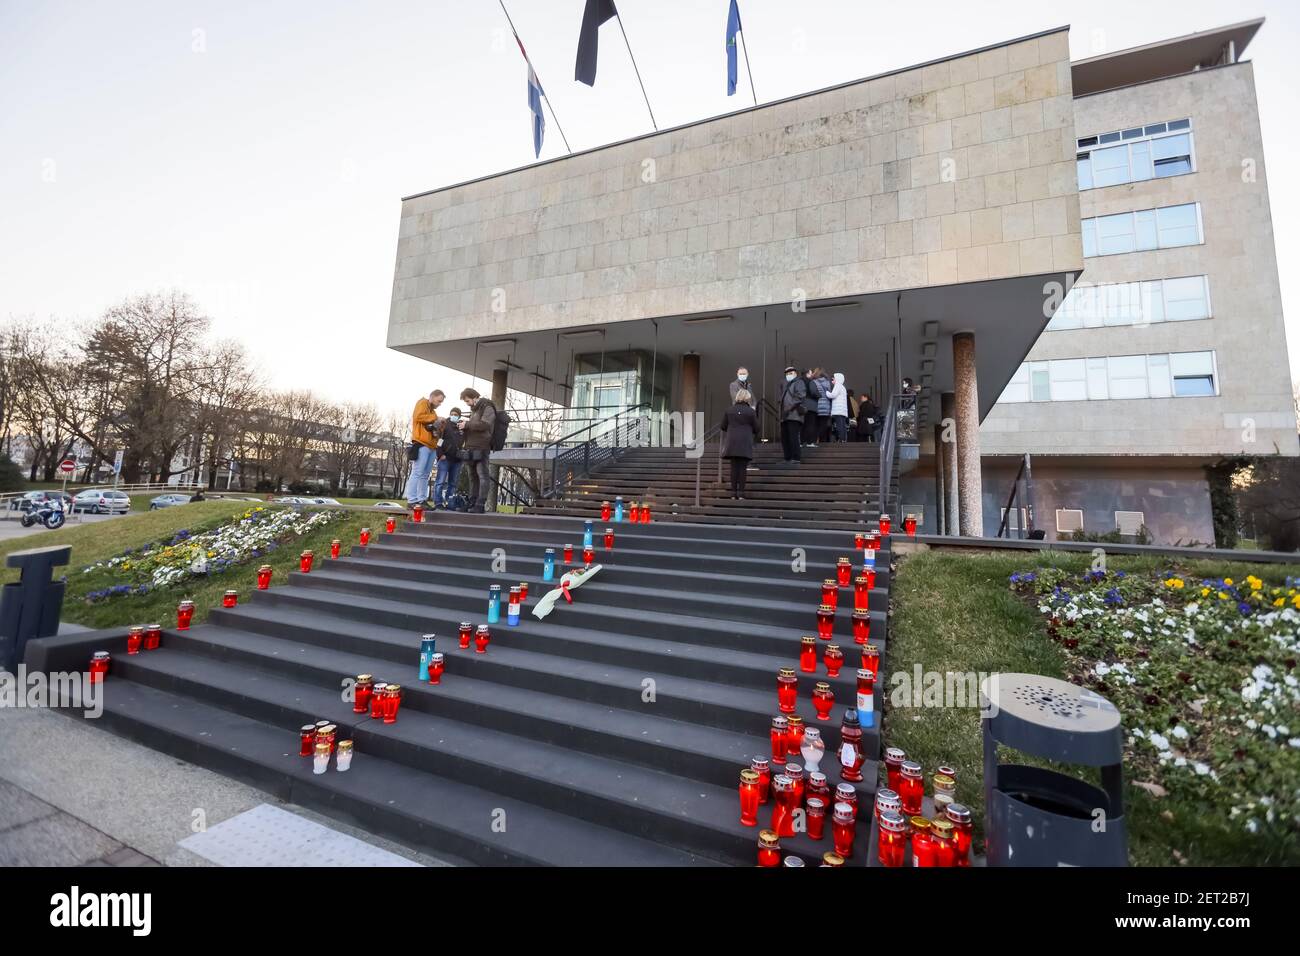 Zagreb, Croatia. 28th Feb, 2021. Due to the death of the mayor of Zagreb, Milan Bandic, citizens light lanterns on the steps of the city council building and stand in line to sign the book of condolences for the deceased Zagreb mayor, Milan Bandic. Flags were placed on the half-spear on the city council building and a black flag was hoisted. Mayor Milan Bandic died of a heart attack on the night of February 28, 2021. Milan Bandic was mayor for 6 terms and ruled Zagreb for a total of 21 years. Credit: Goran Jakuš/Alamy Live News Stock Photo